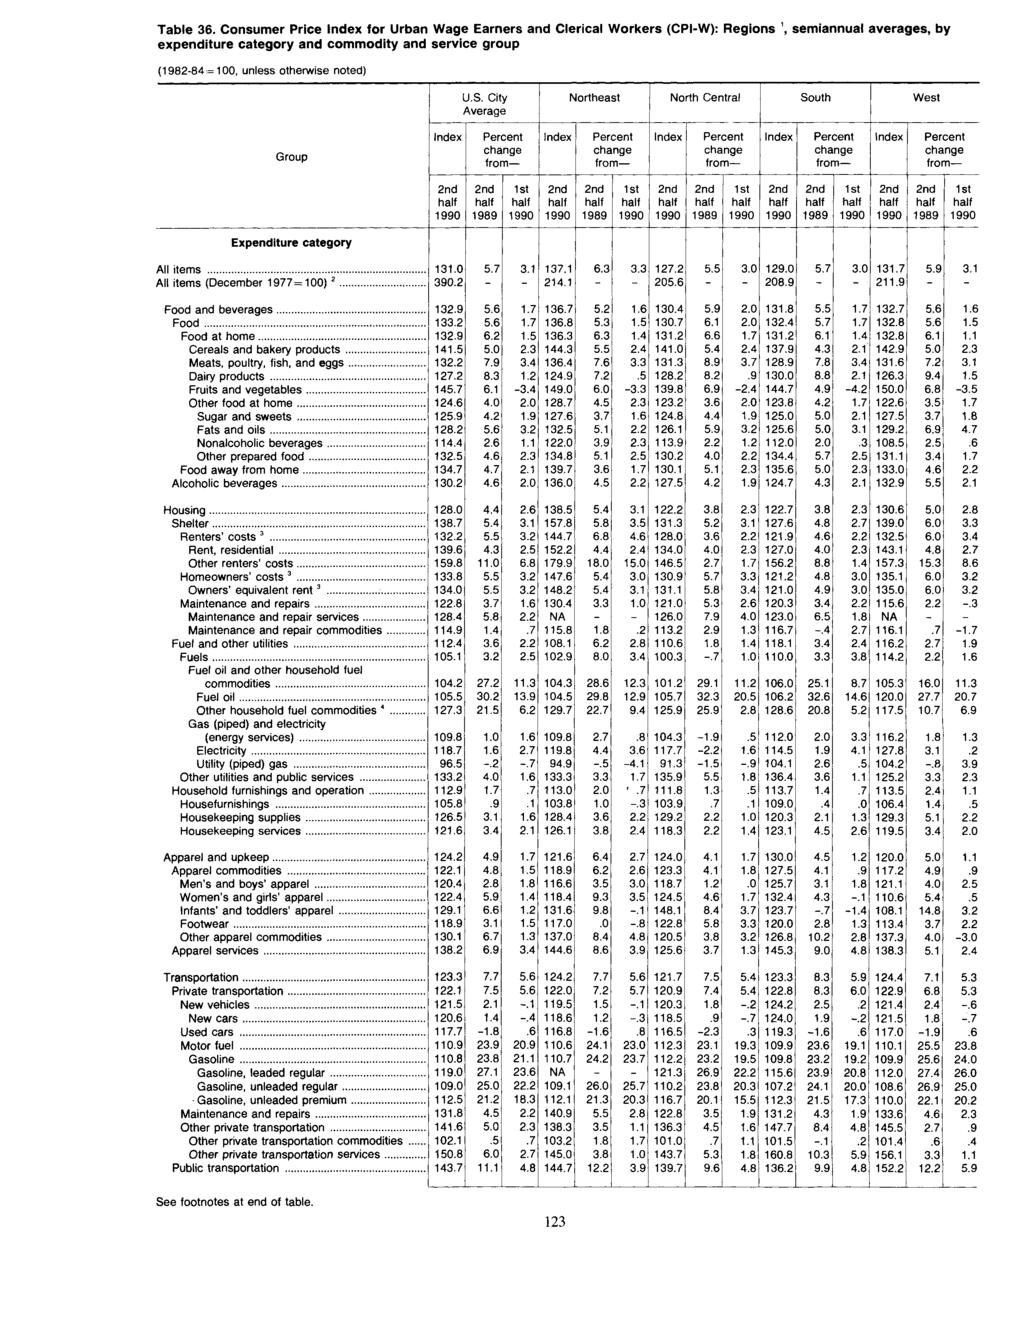 Table 36. Consumer Price for Urban Wage Earners and Clerical Workers (CPI-W): Regions 1, semiannual s, by expenditure category and commodity and service group U.S.